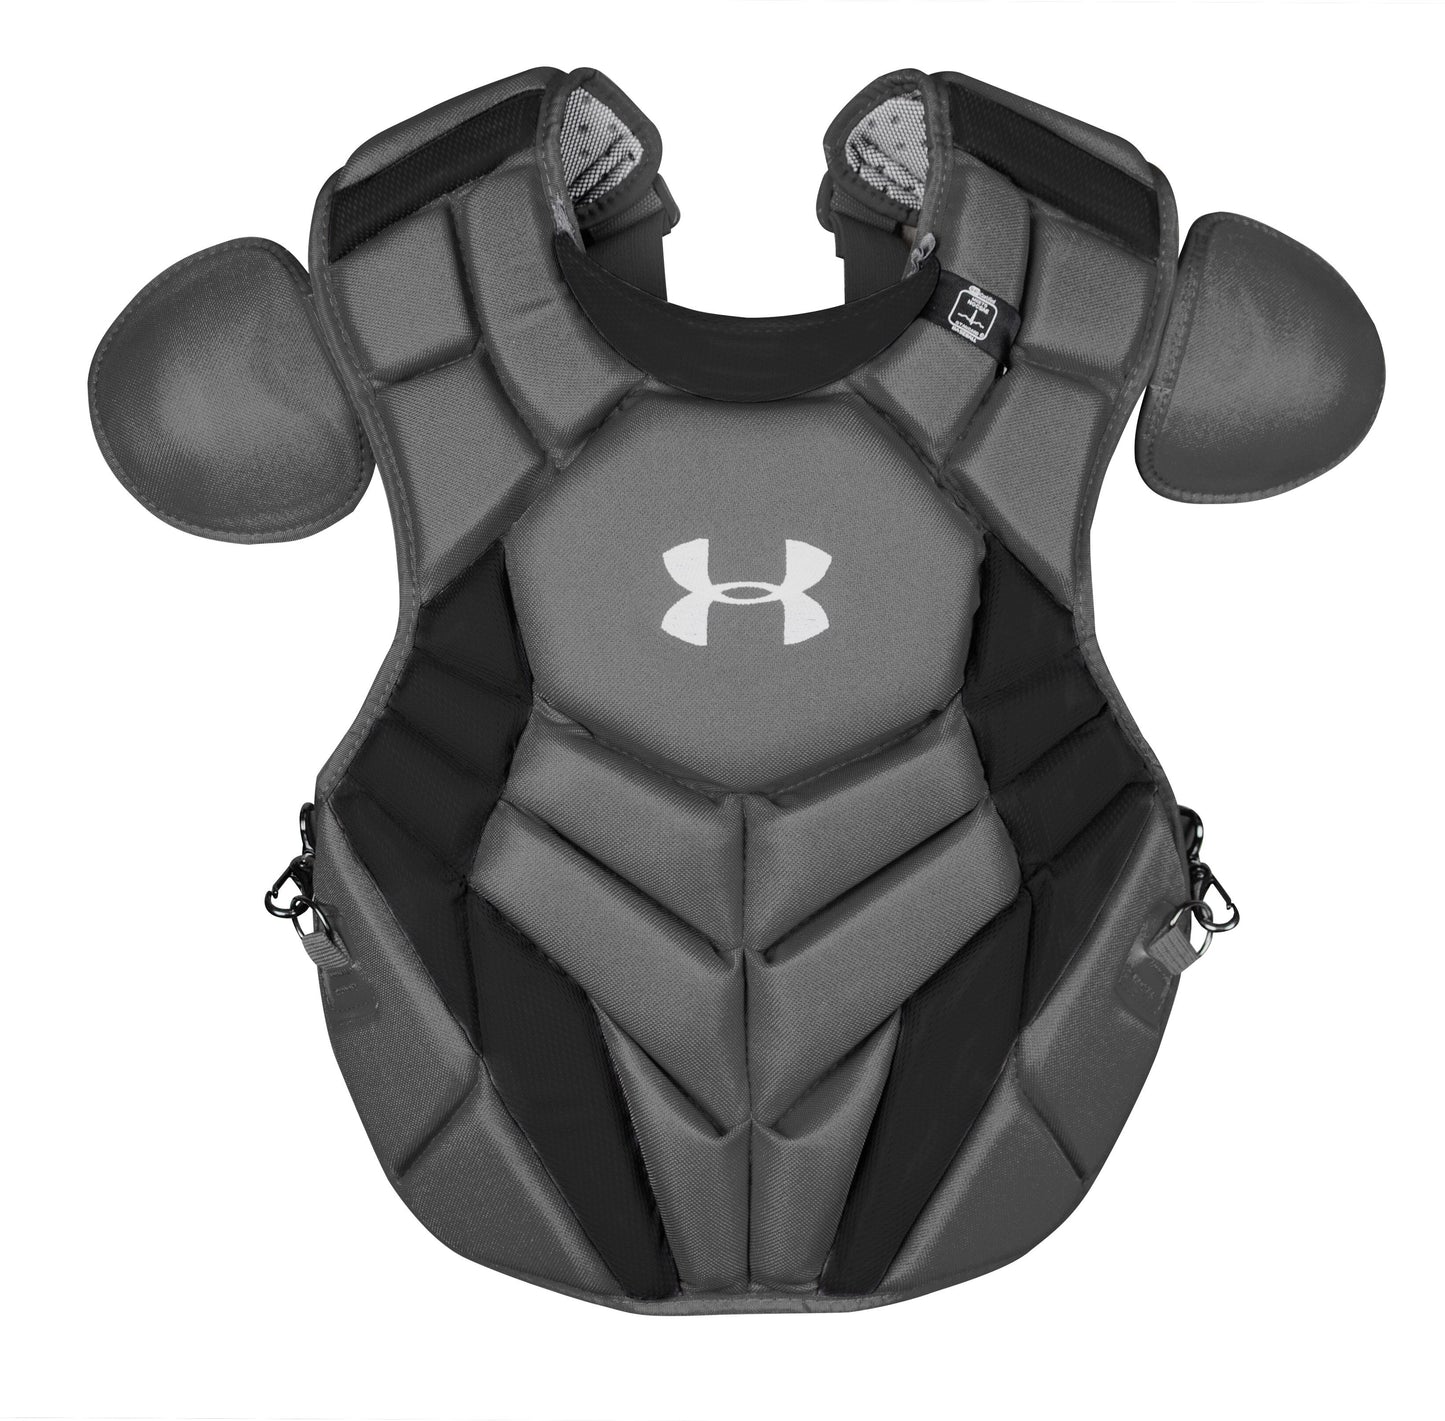 Under Armour Pro 4 Adult Chest Protector UACPCC4-AP